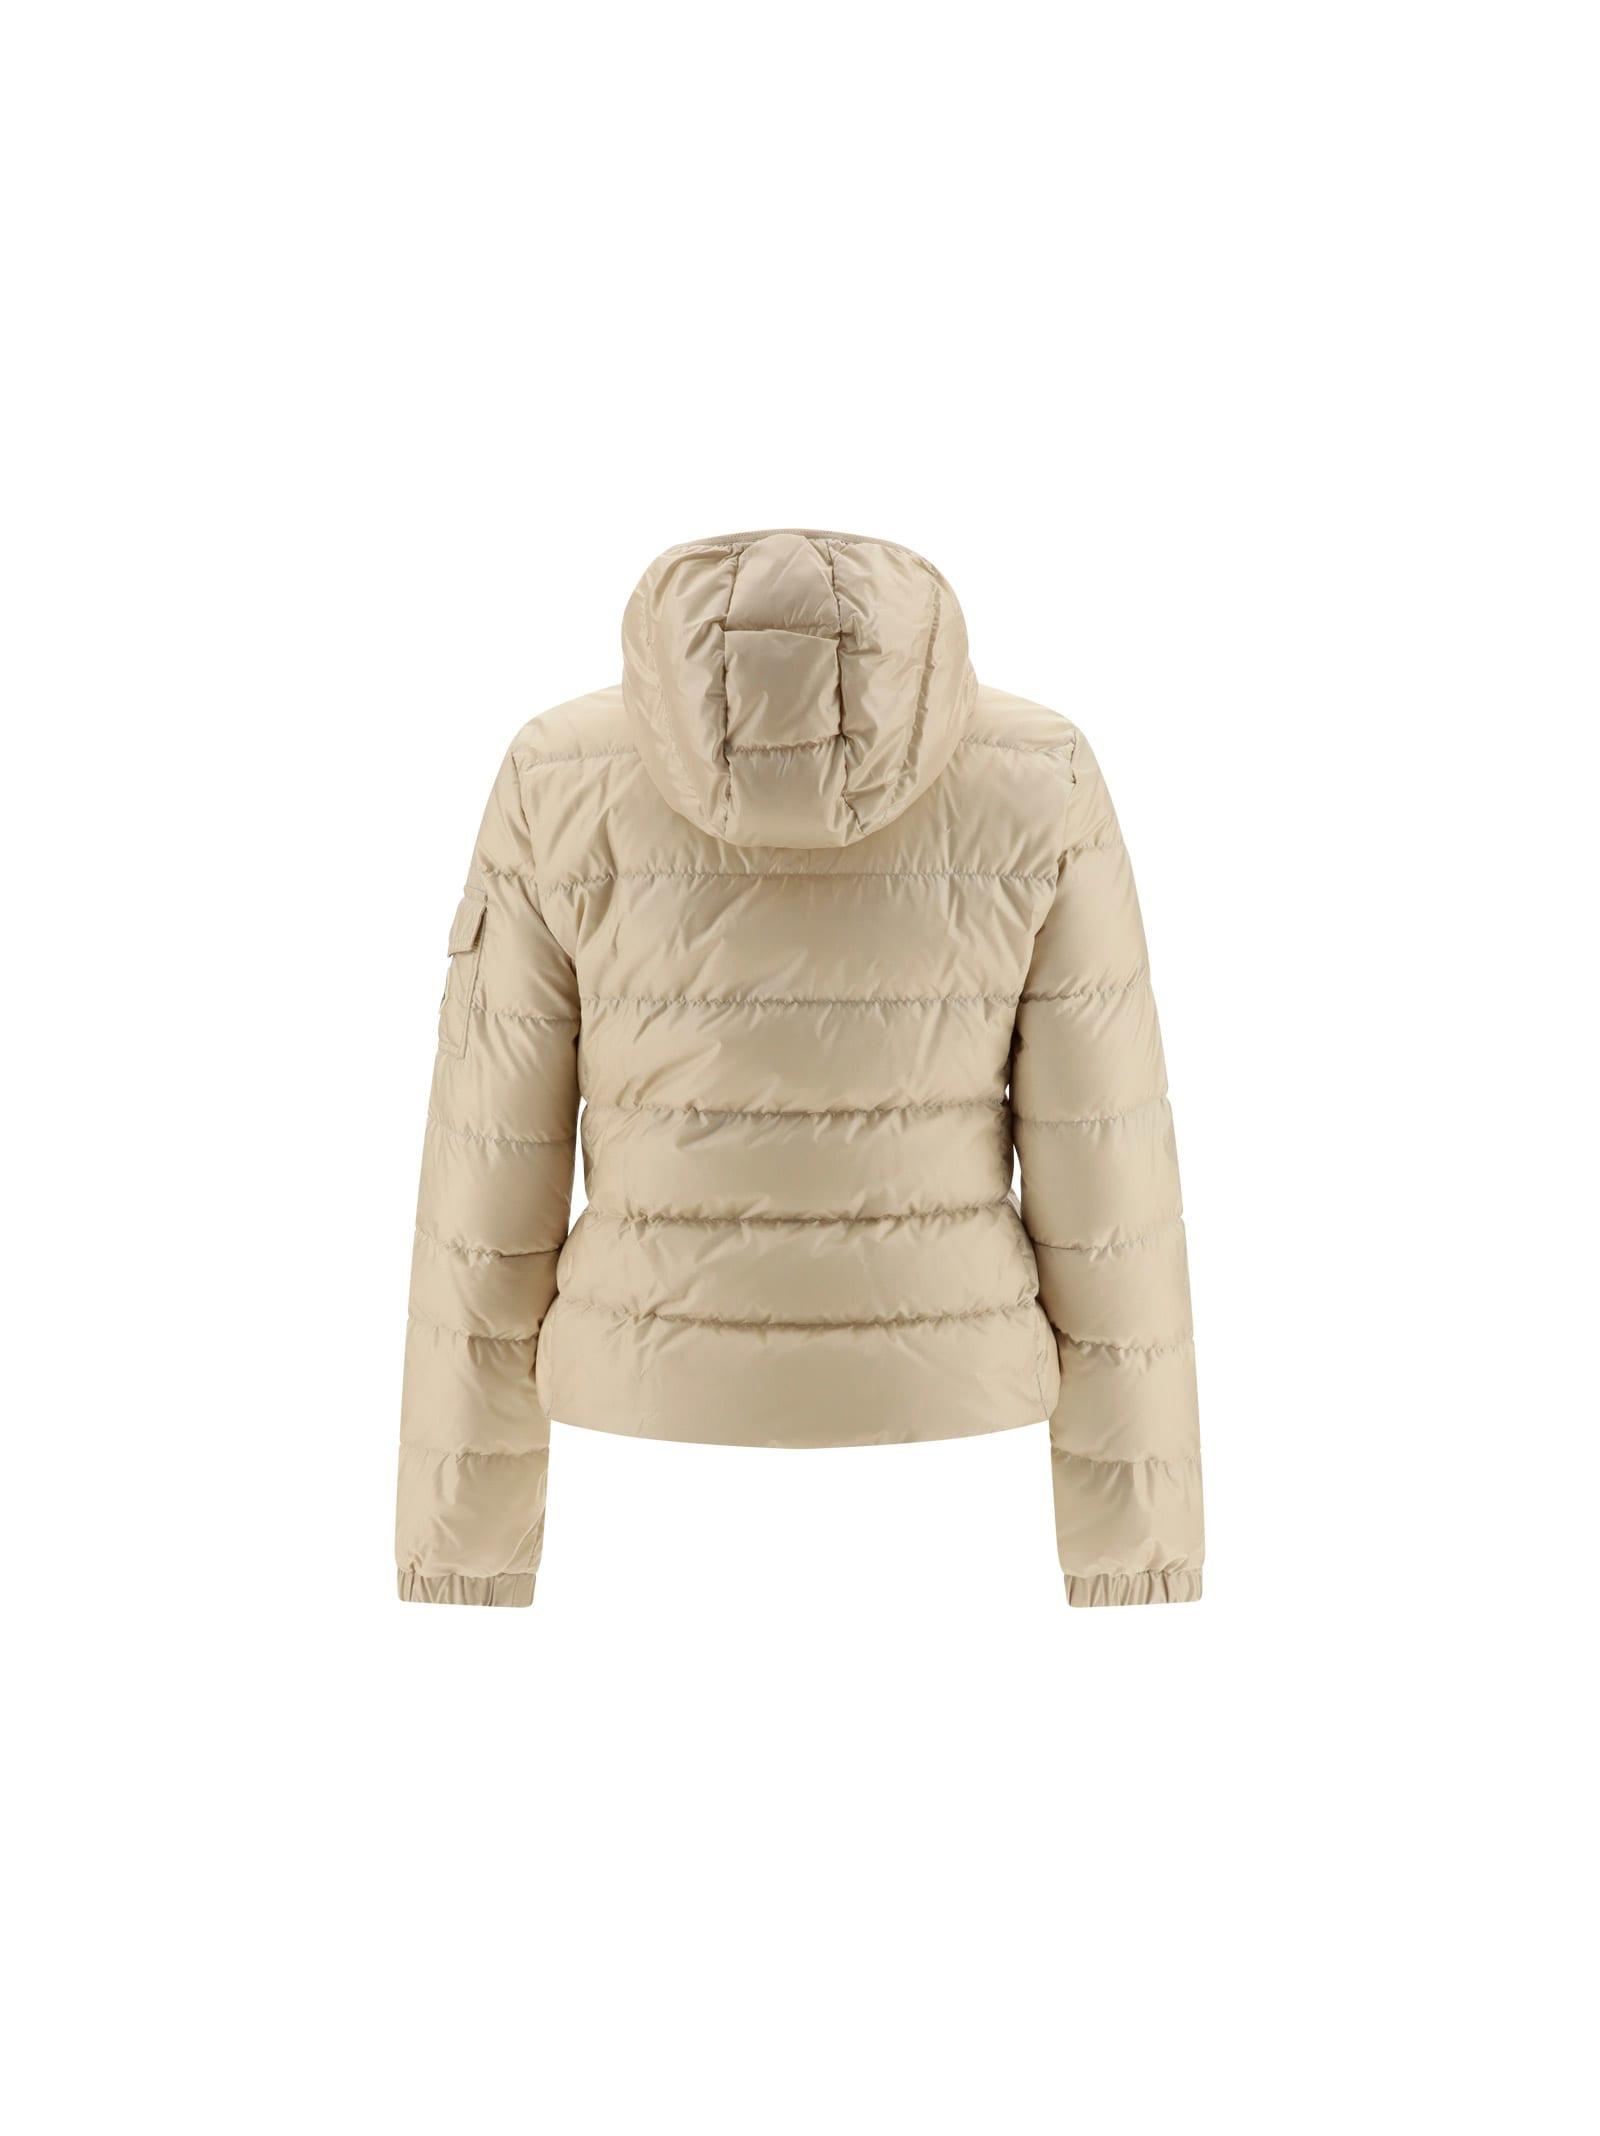 Moncler Gles Padded Jacket in Natural | Lyst